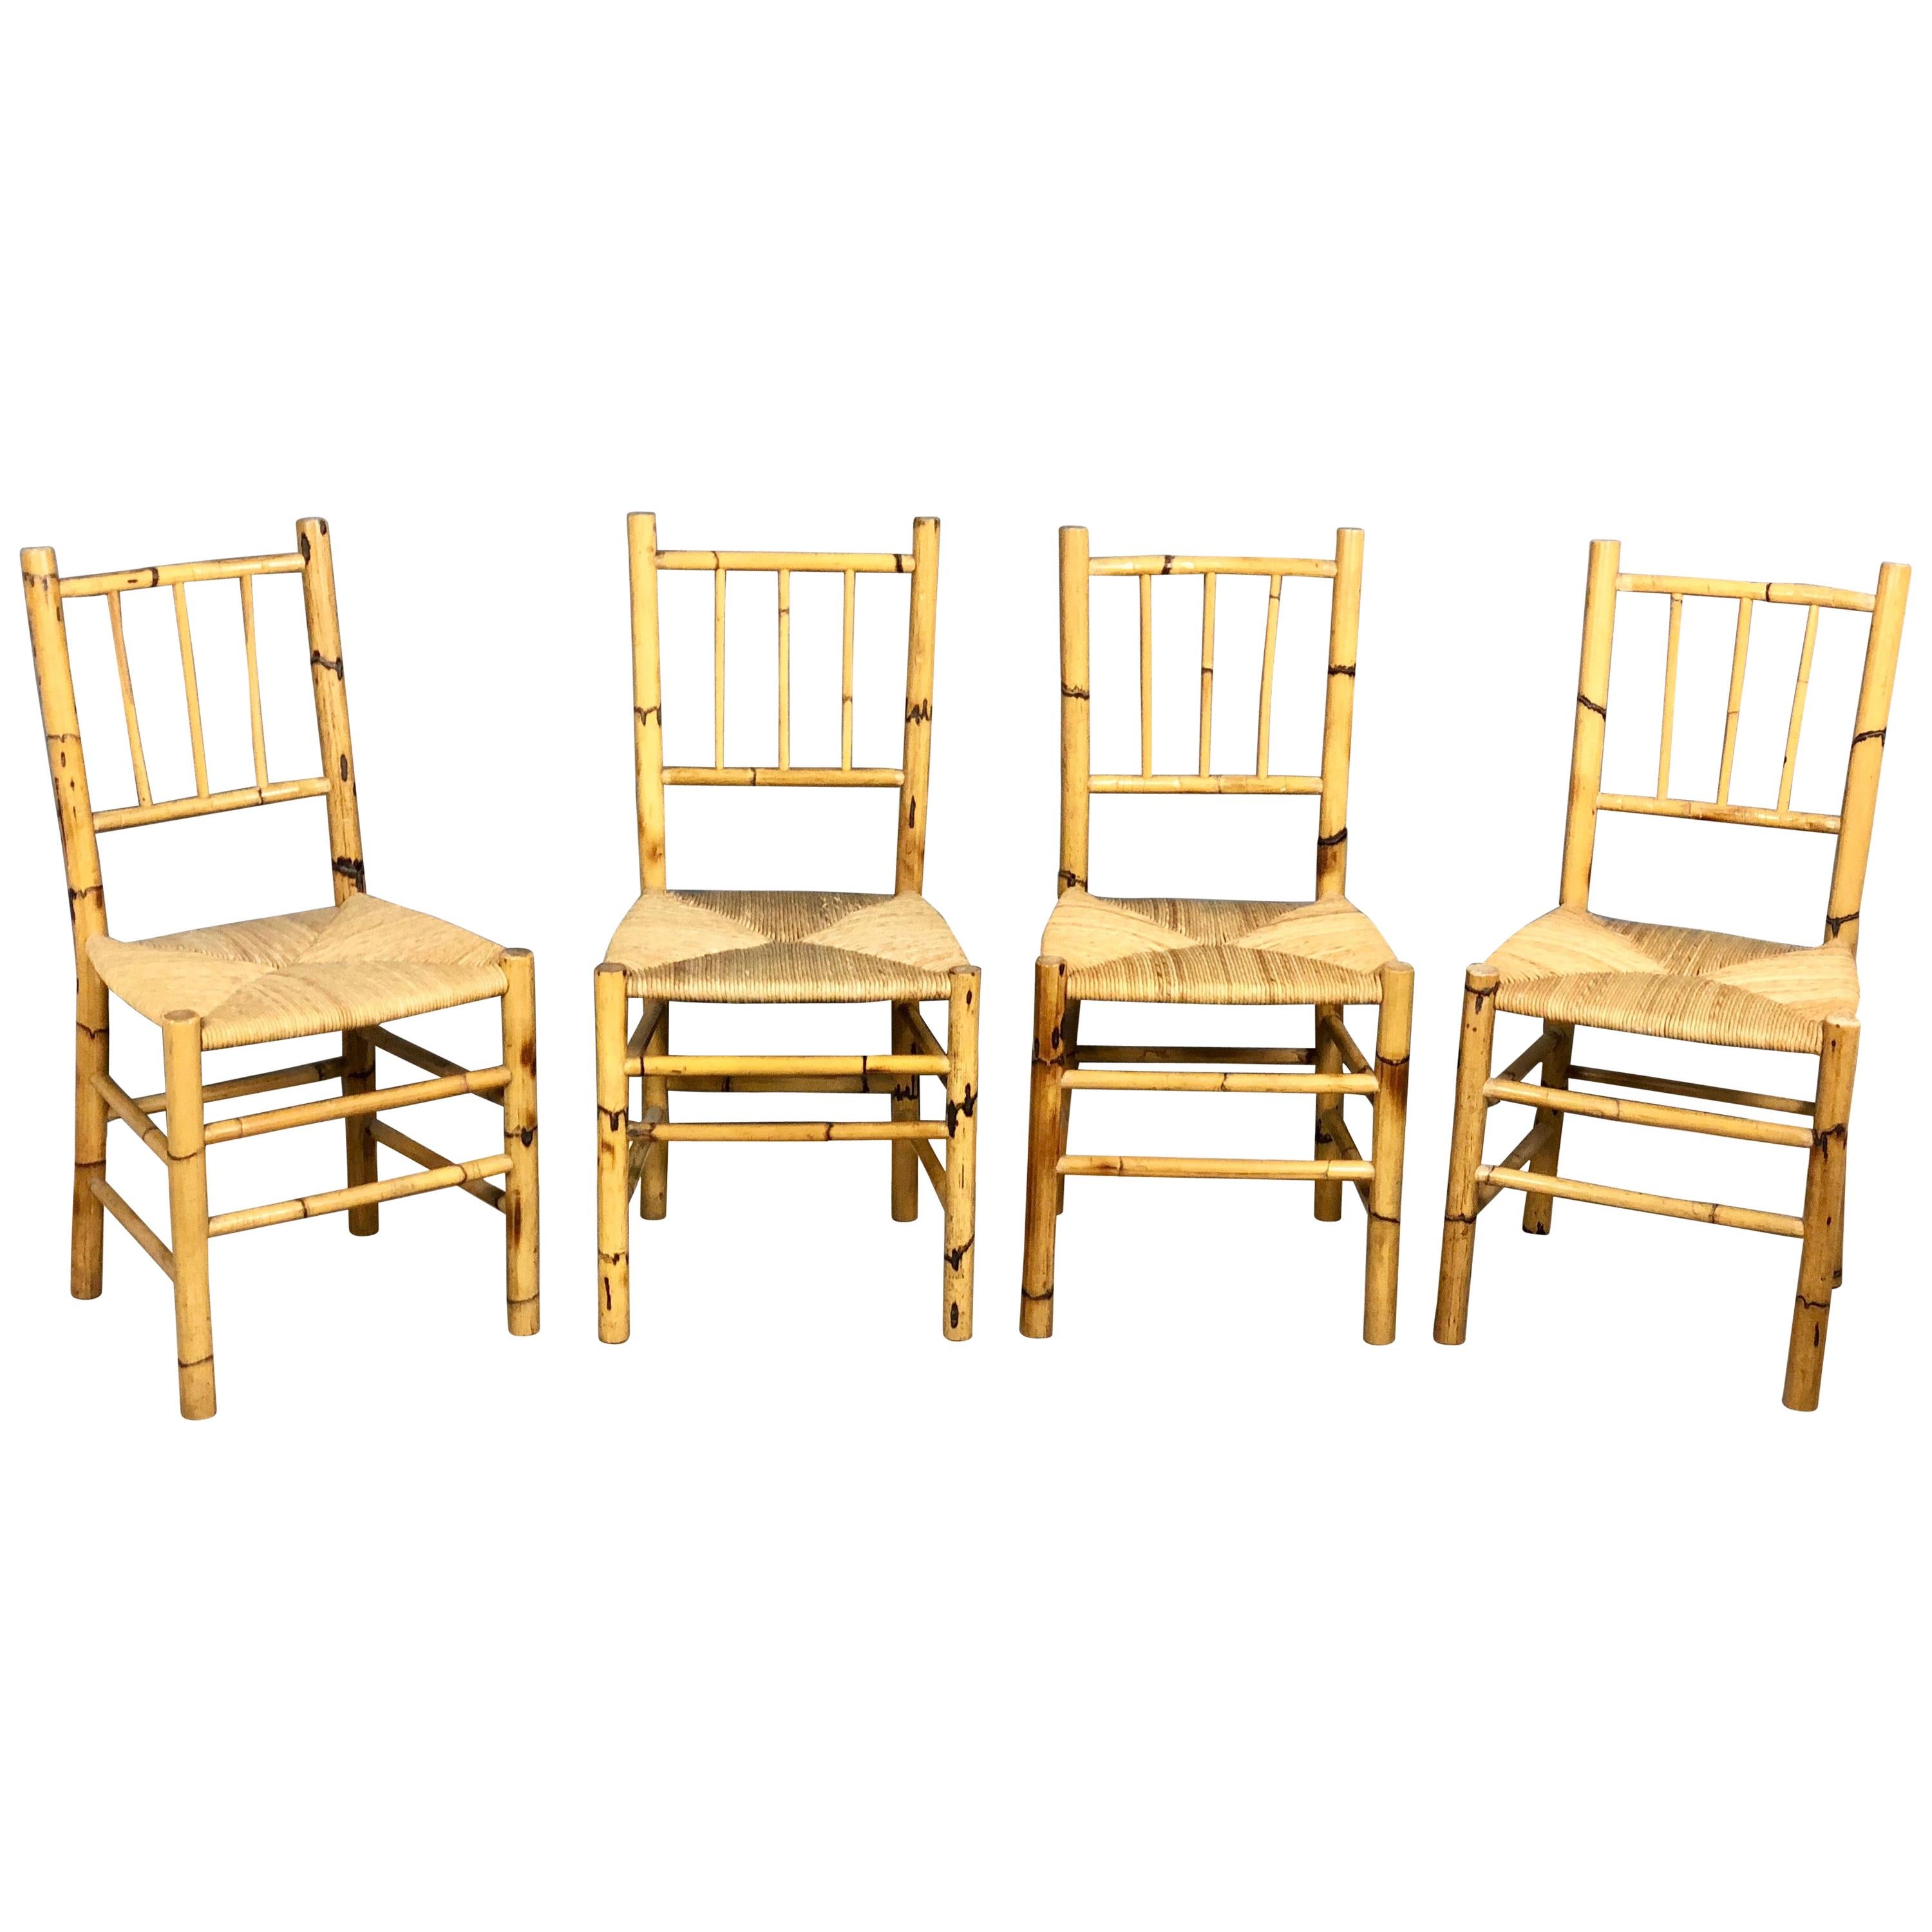 Set of Four Straw and Bamboo Vintage Chairs, Italy, 1960s For Sale